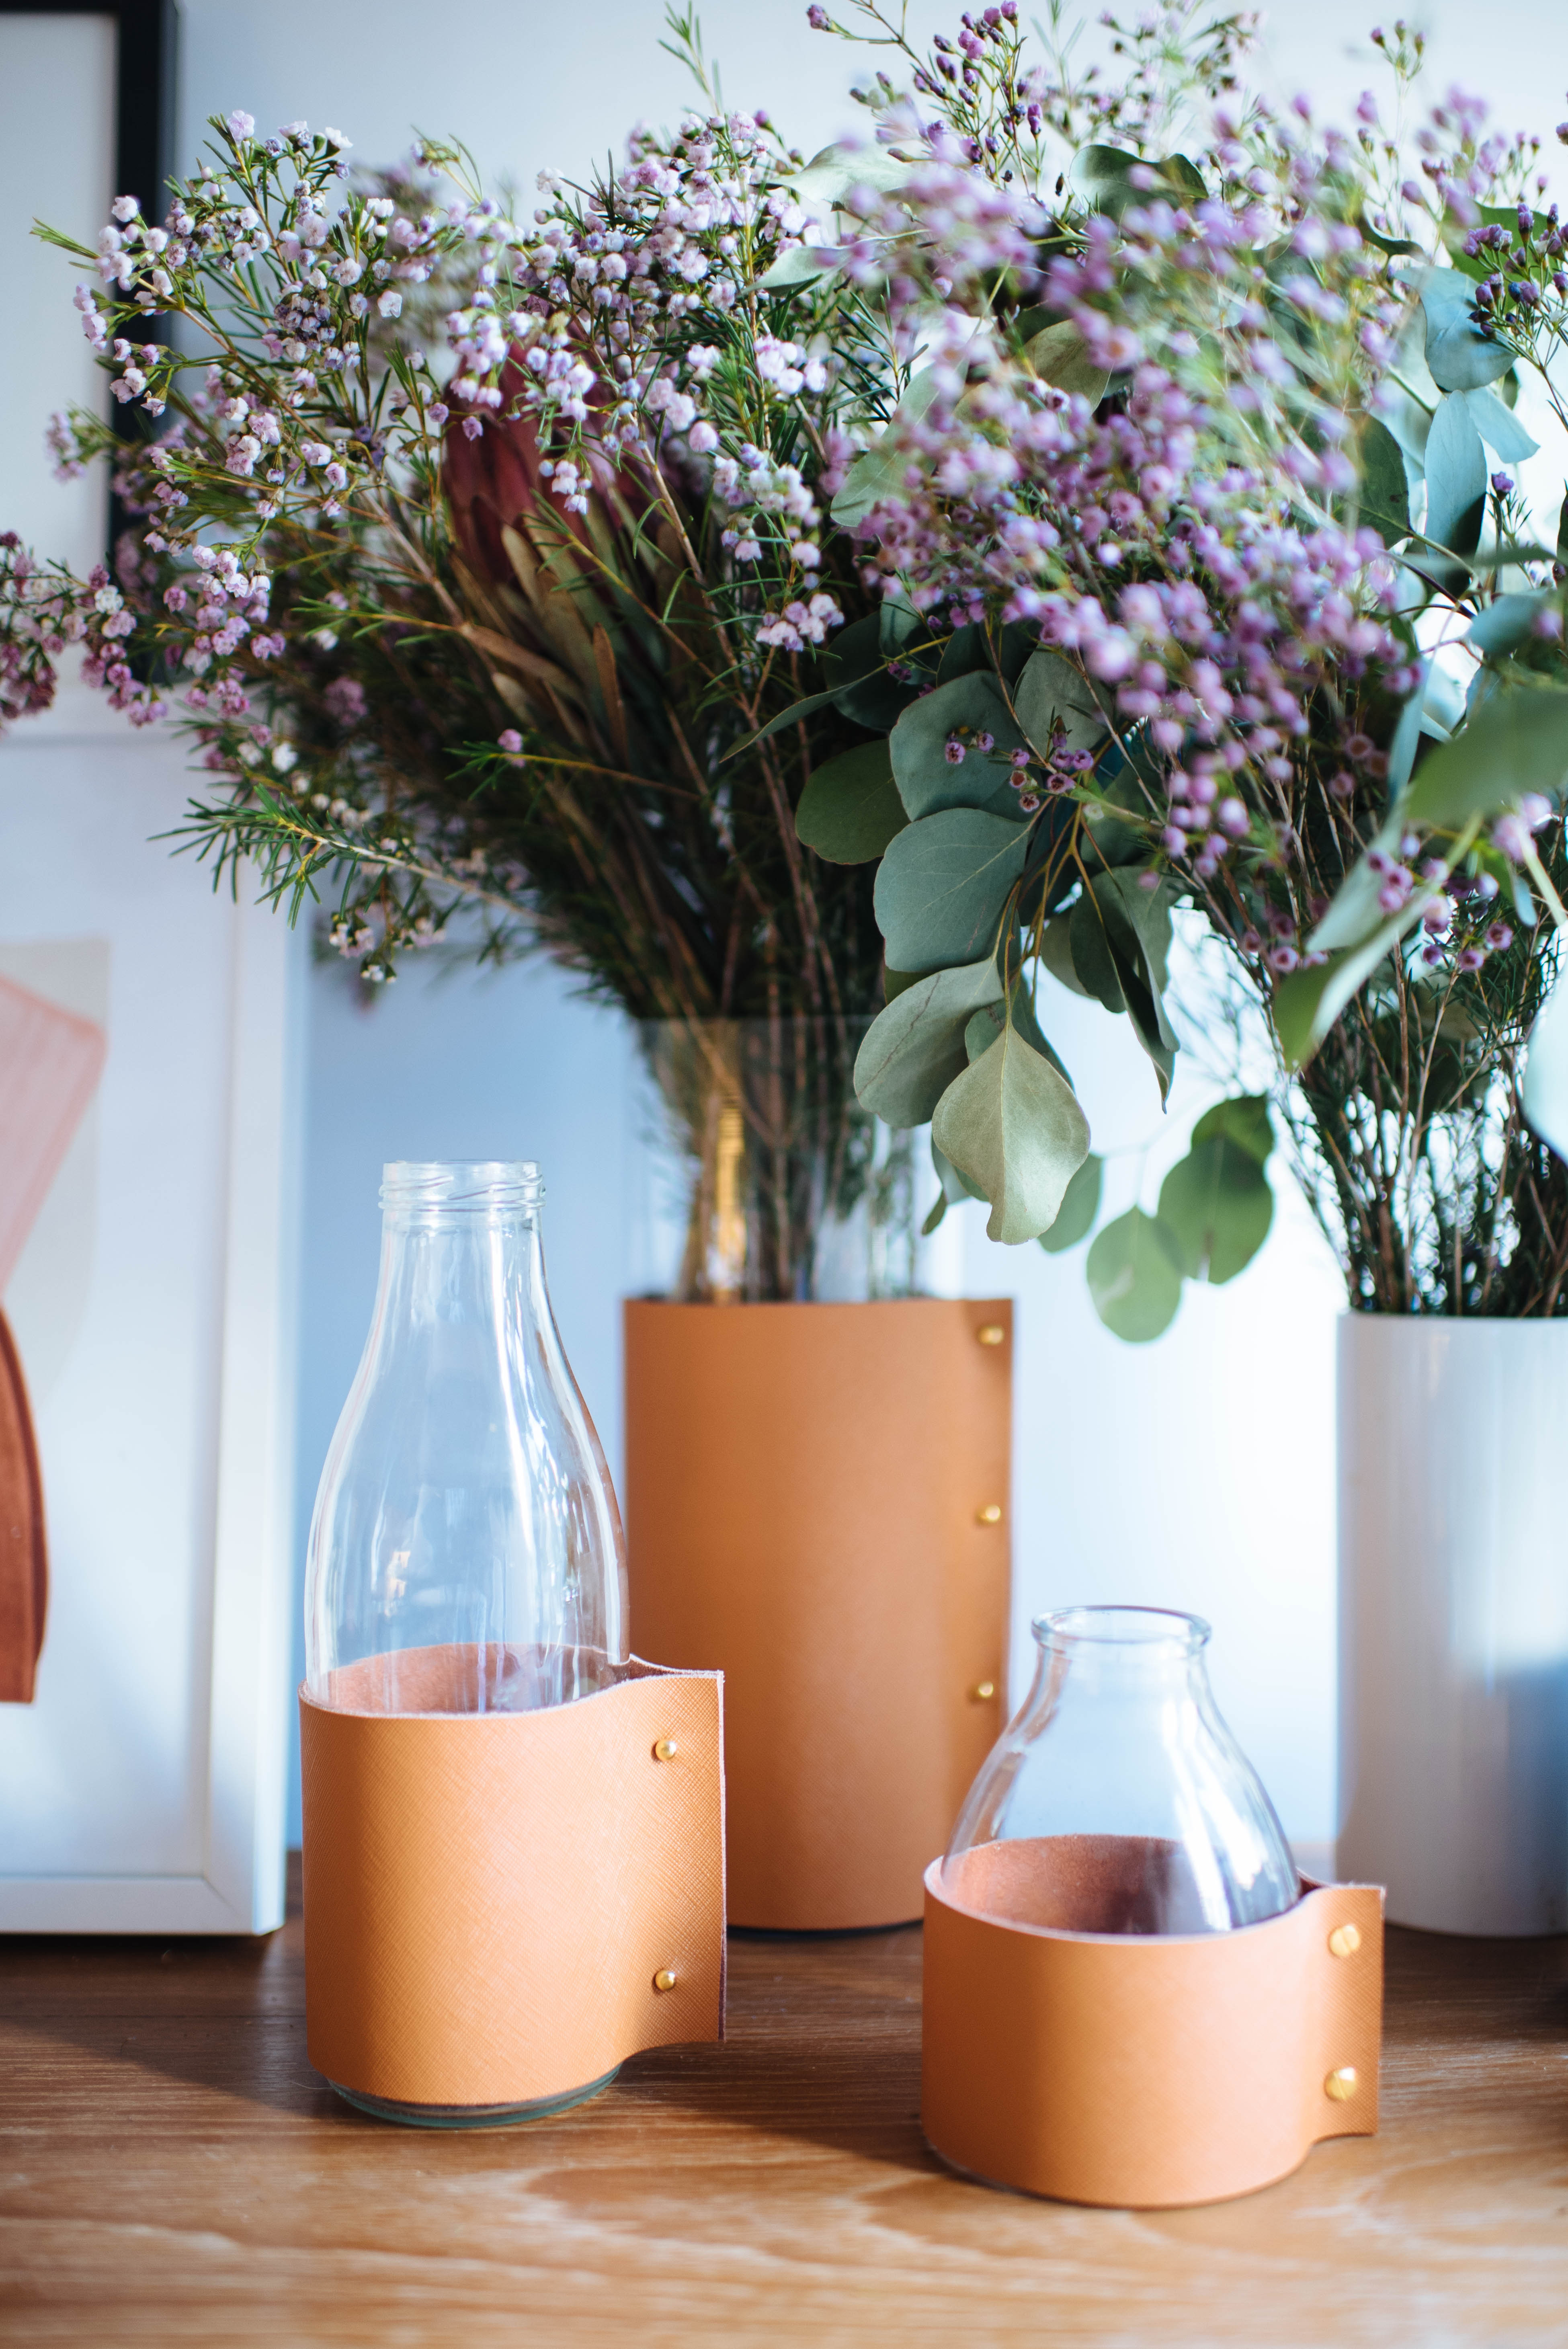 DIY Leather Wrapped Vases